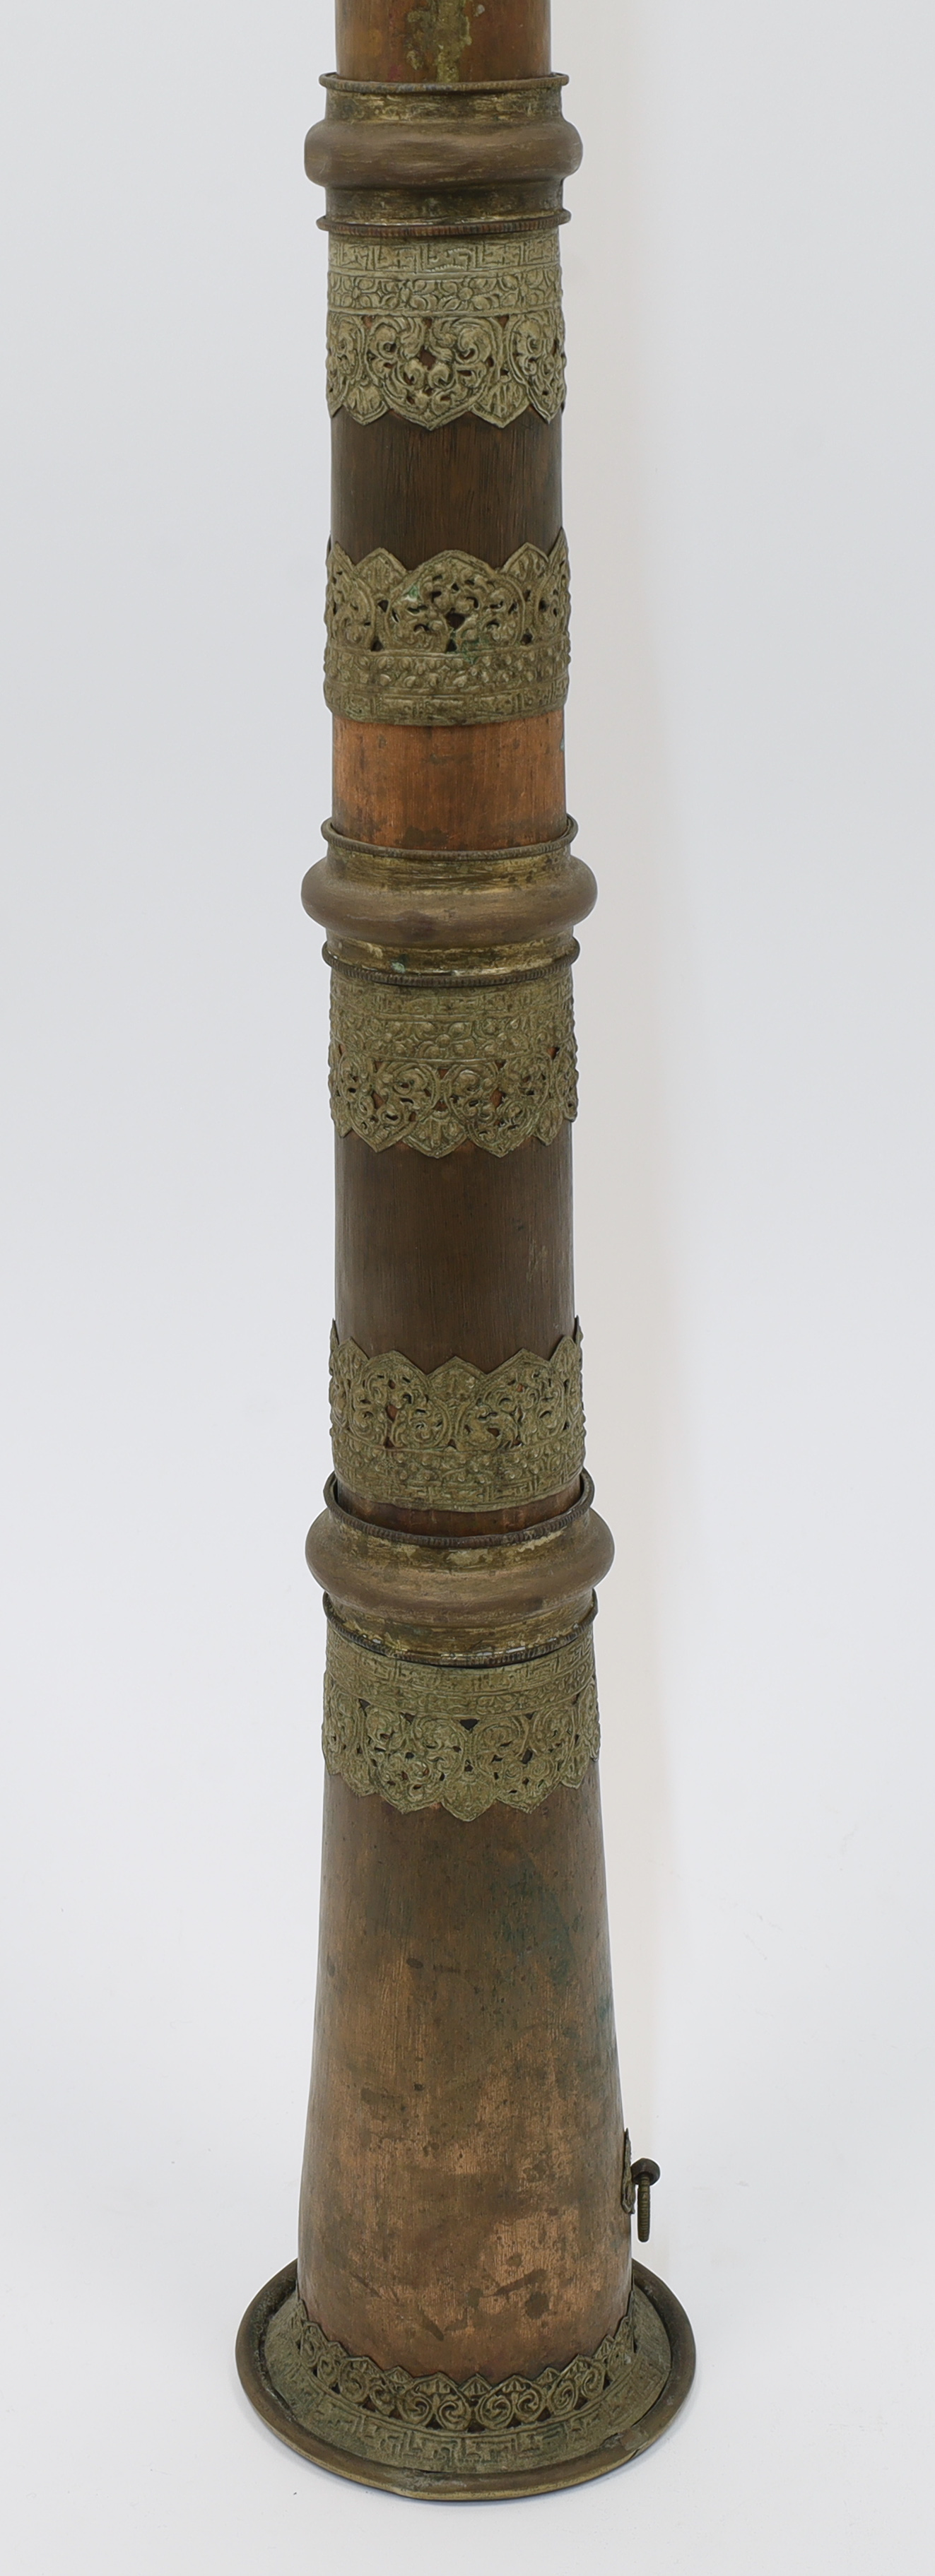 A Tibetan brass-mounted copper dung chen, 20th century, of typical form with three telescopic col... - Image 2 of 2